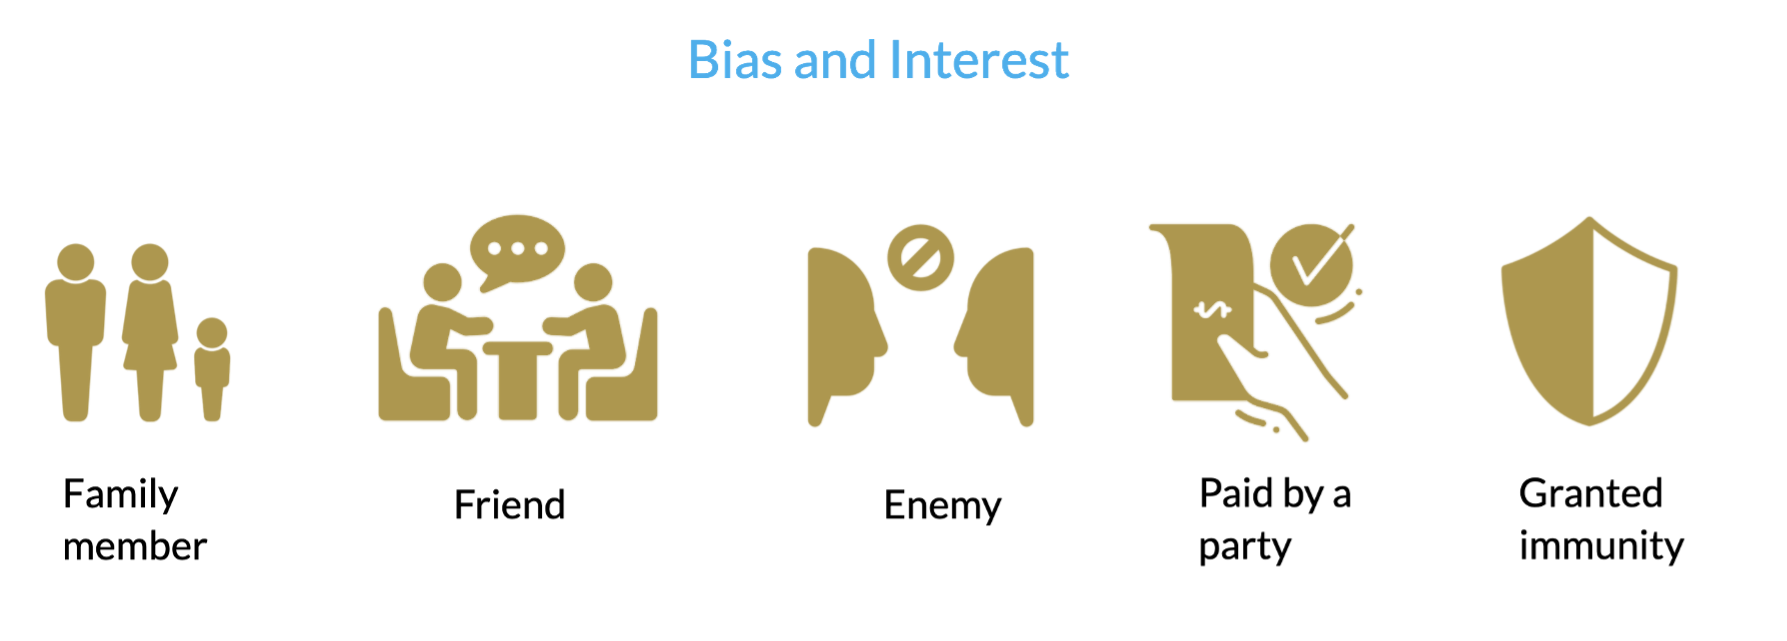 Bias and Interest